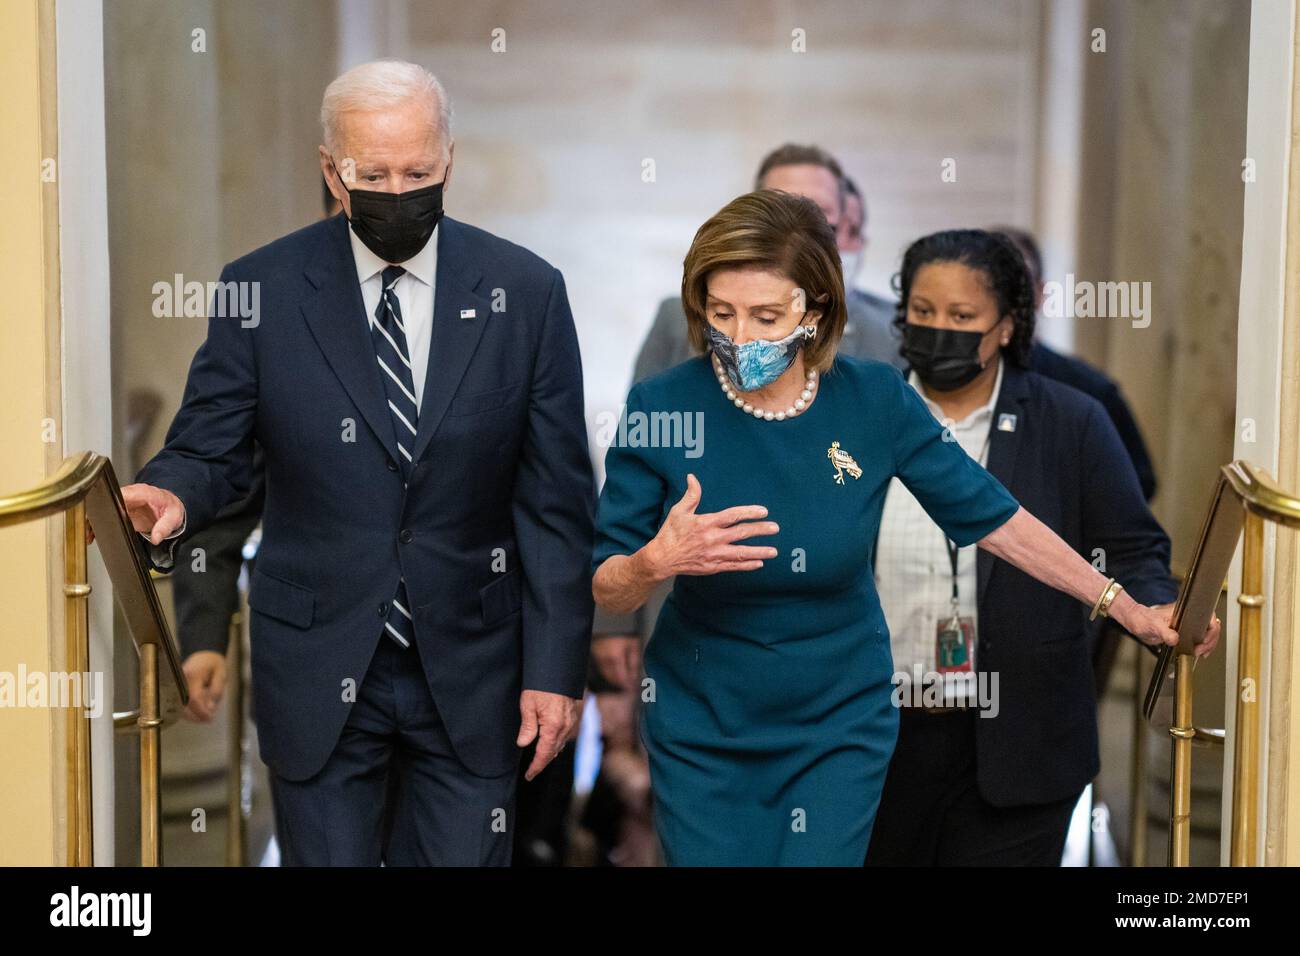 Reportage: President Joe Biden walks with House Speaker Nancy Pelosi, D-Calif., as he departs the U.S. Capitol after addressing the House Democratic Caucus, Thursday, October 28, 2021 Stock Photo